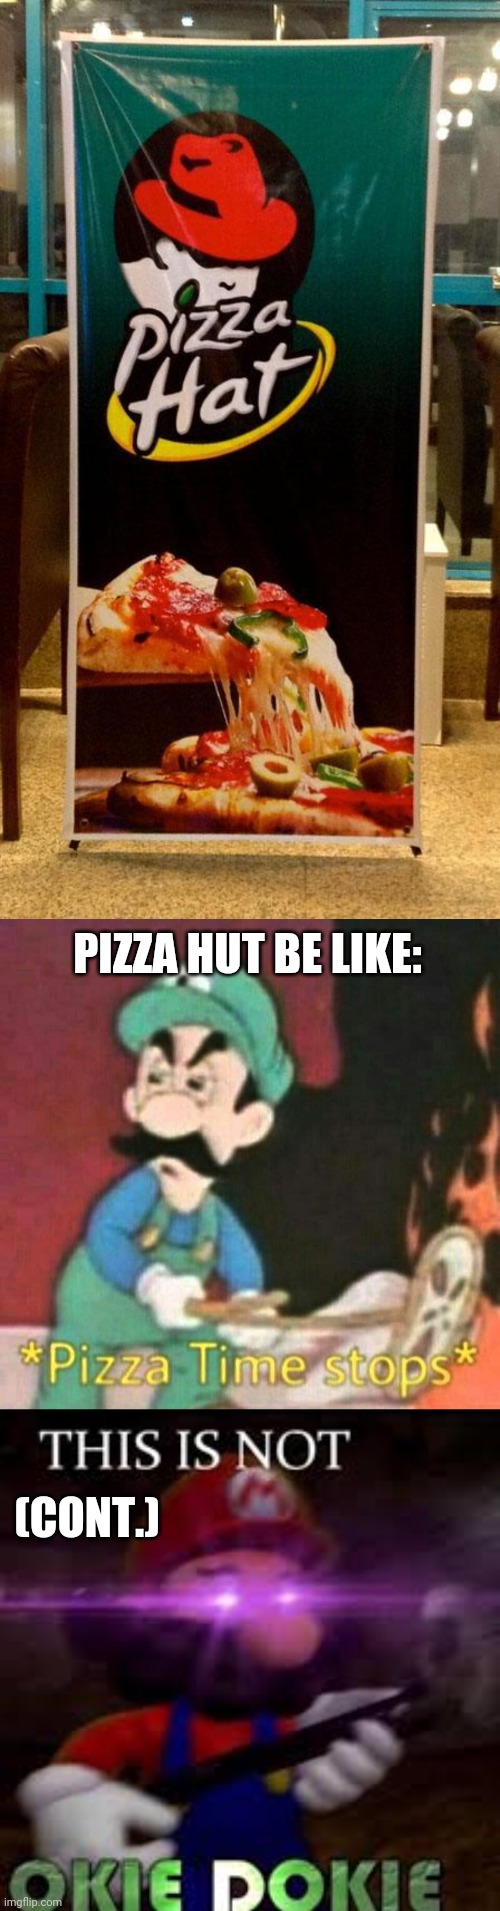 Pizza Hat CANNOT OUT PIZZA THE HUT!! (Pizza Hut is the original bc no1 can out pizza the Hut) | PIZZA HUT BE LIKE:; (CONT.) | image tagged in pizza time stops,this is not okie dokie | made w/ Imgflip meme maker